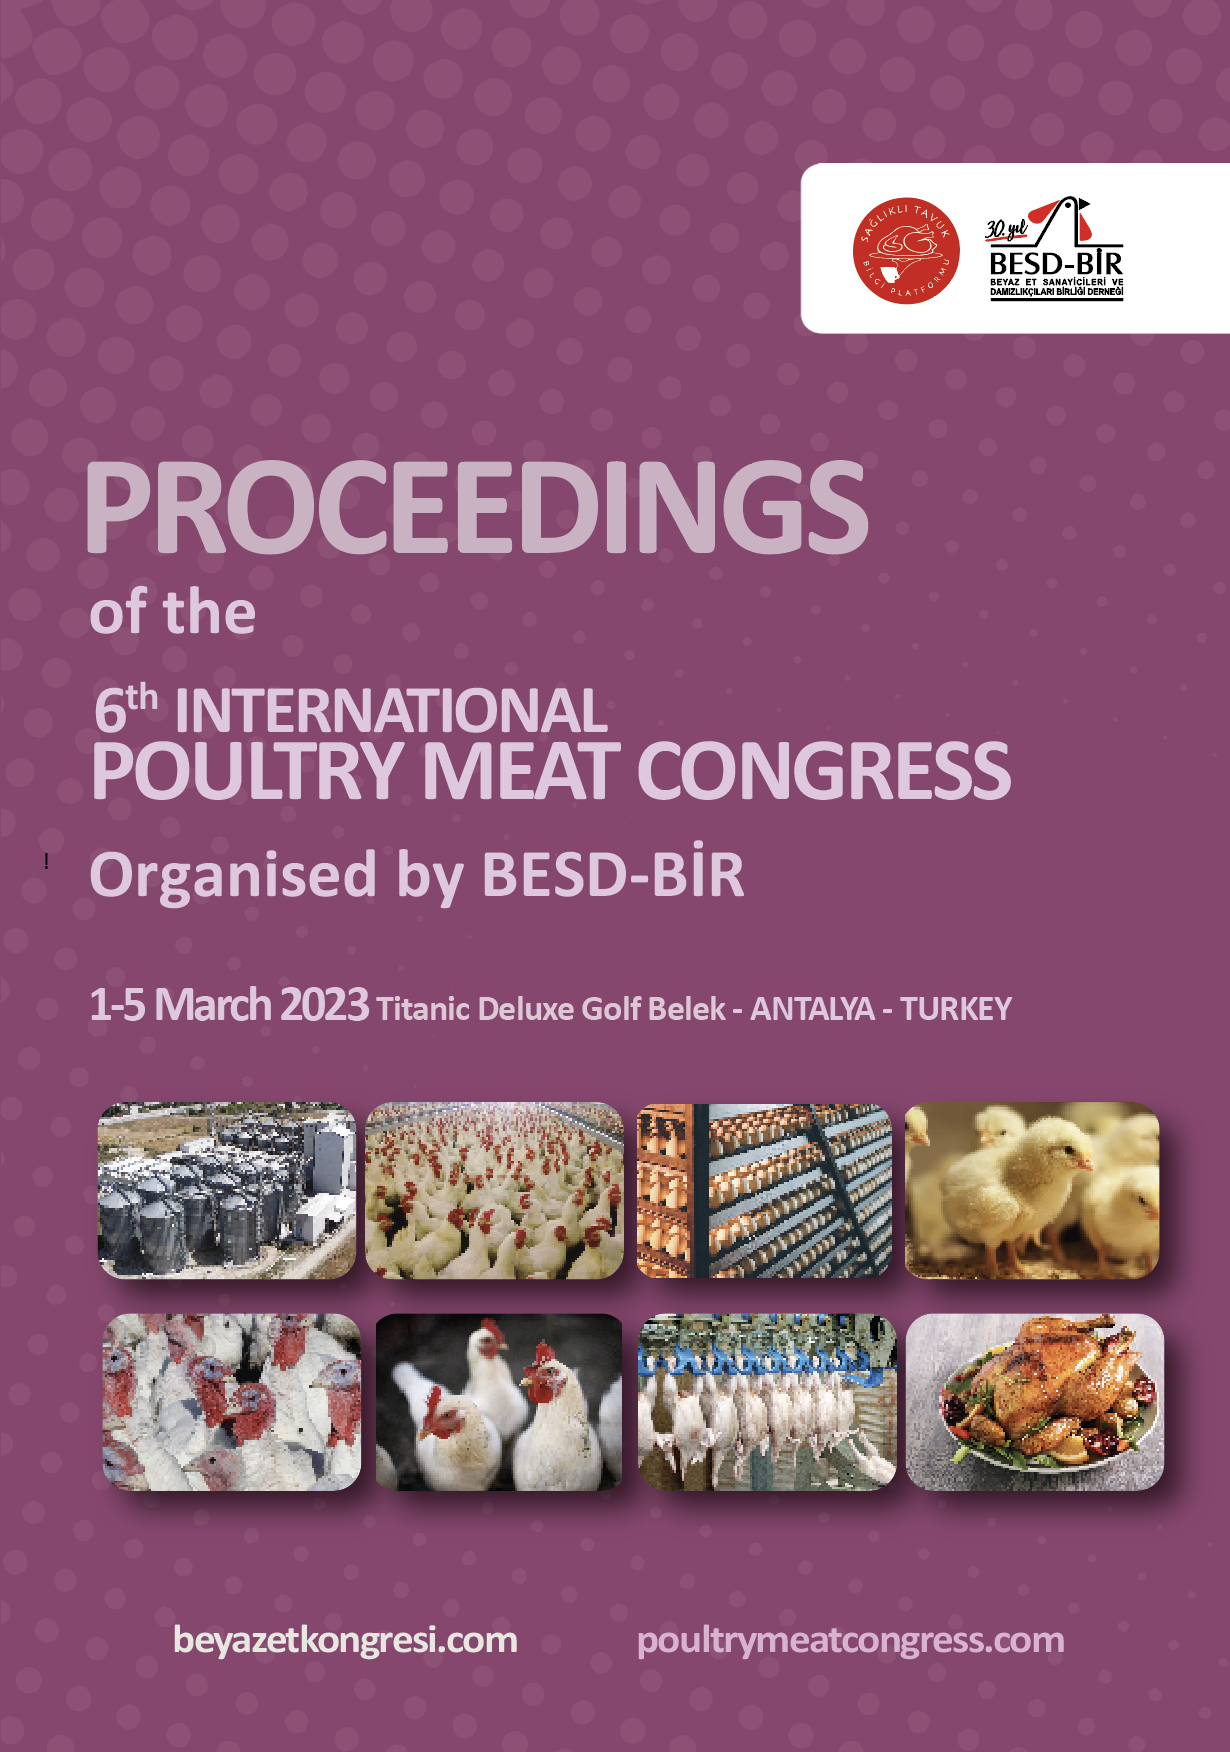 6th International Poultry Meat Congress Book - English